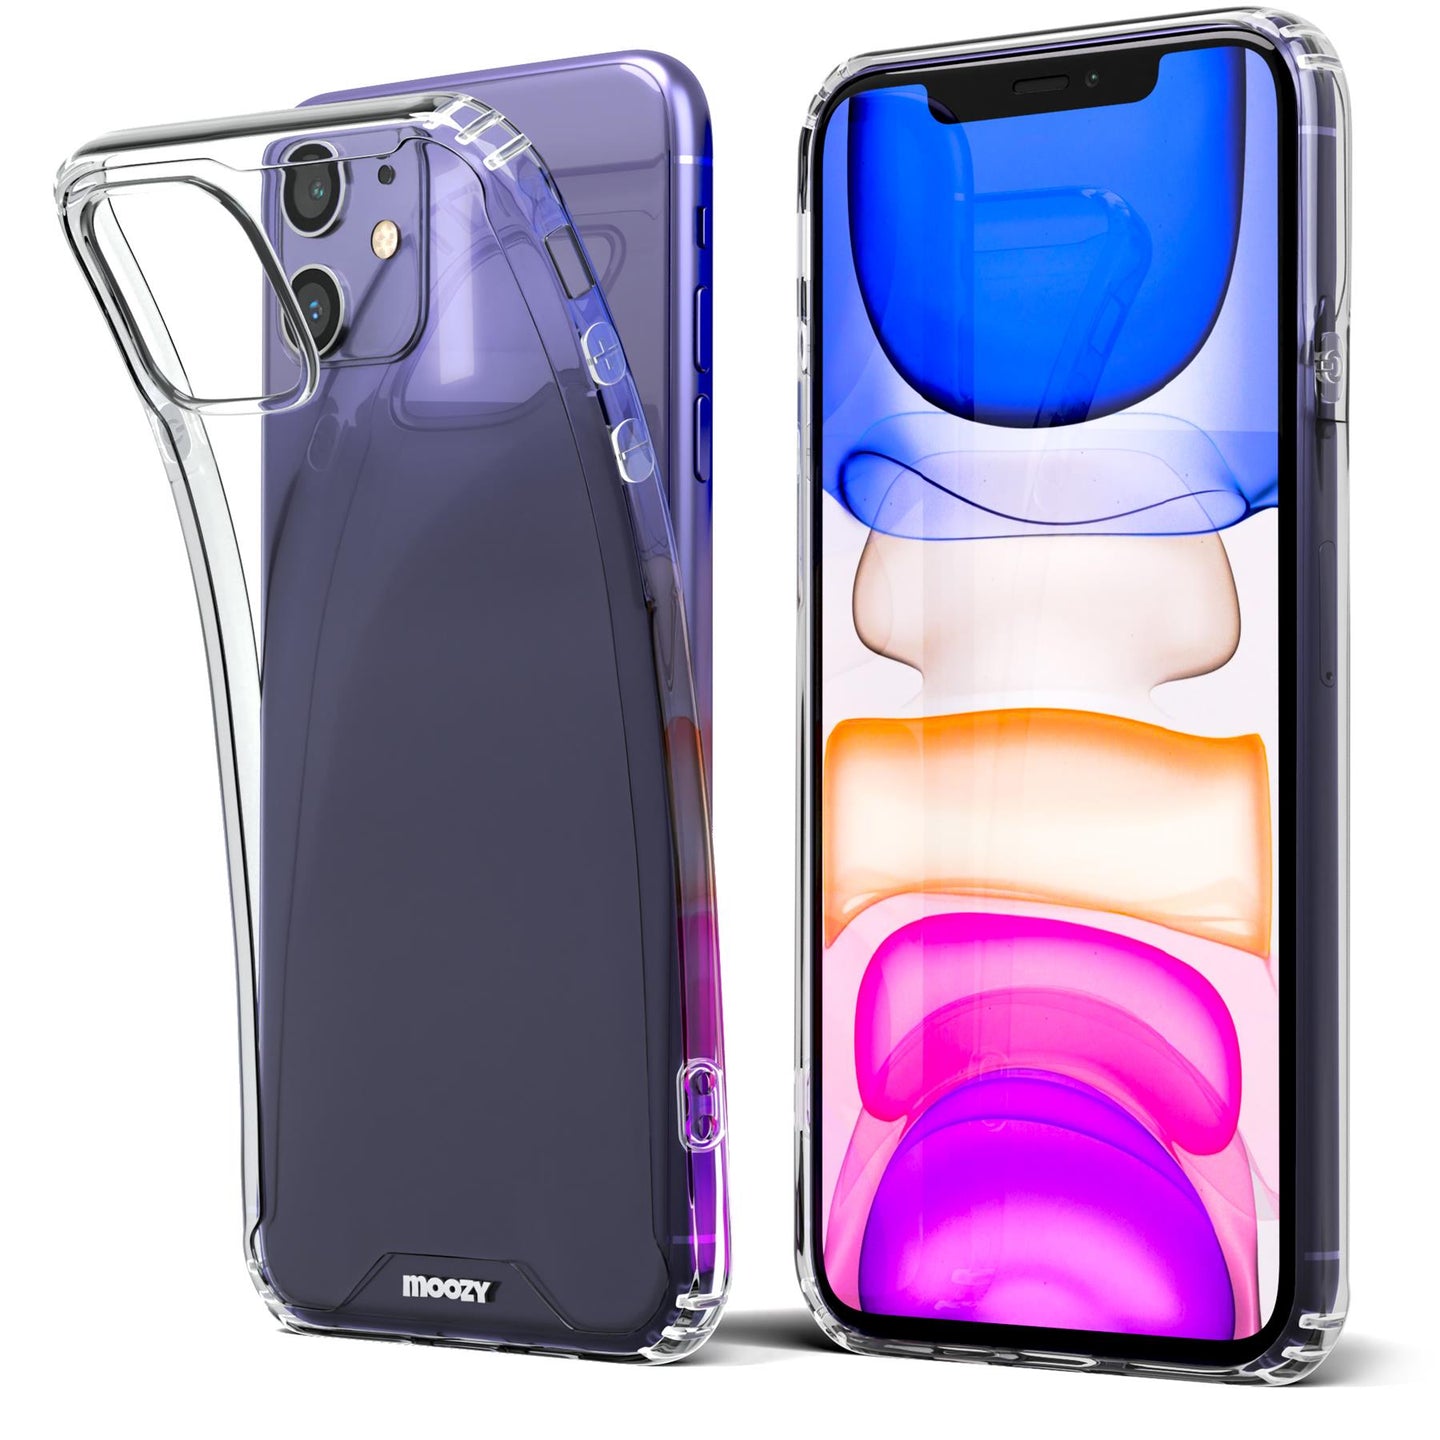 Moozy Xframe Shockproof Case for iPhone 11 - Transparent Rim Case, Double Colour Clear Hybrid Cover with Shock Absorbing TPU Rim